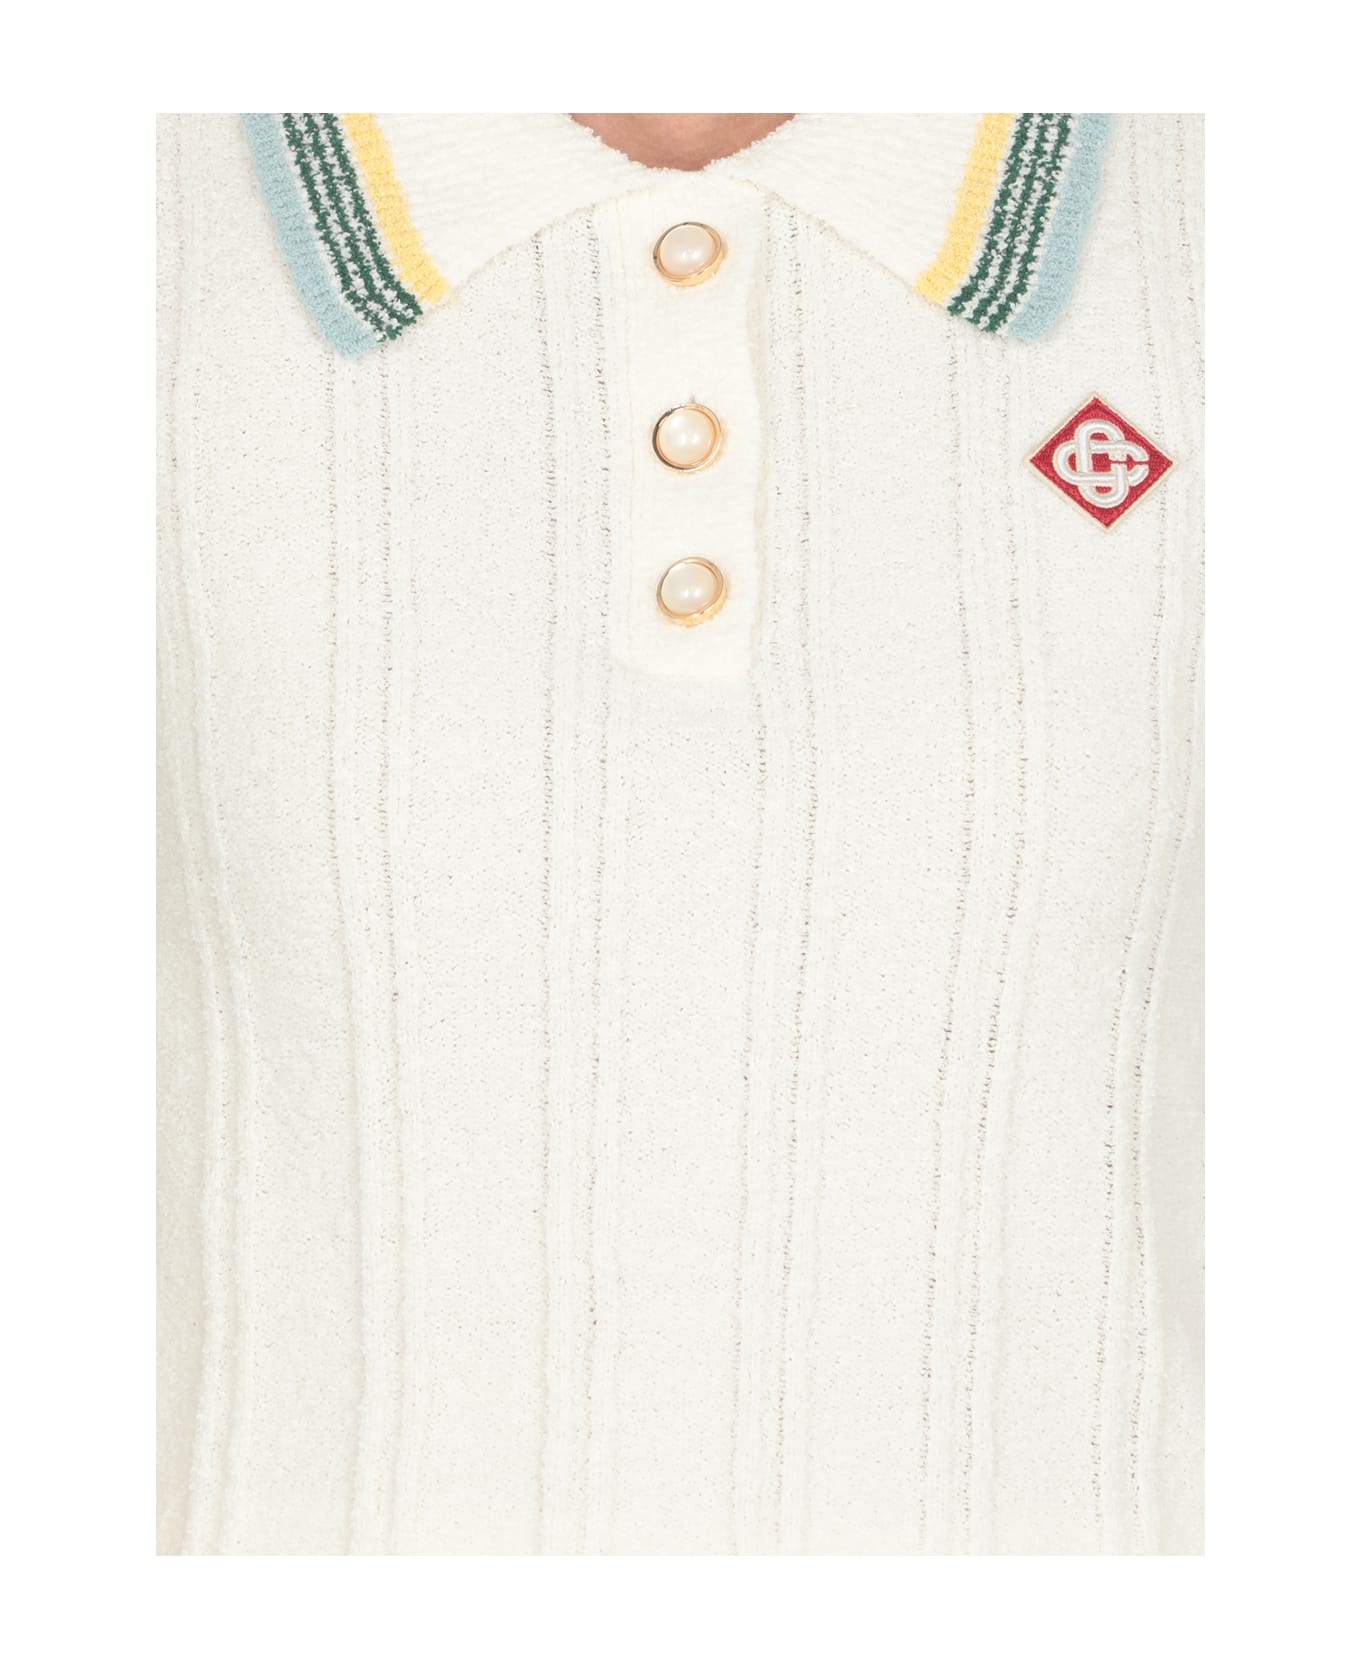 Casablanca Polo Shirt With Decorative Buttons - Ivory